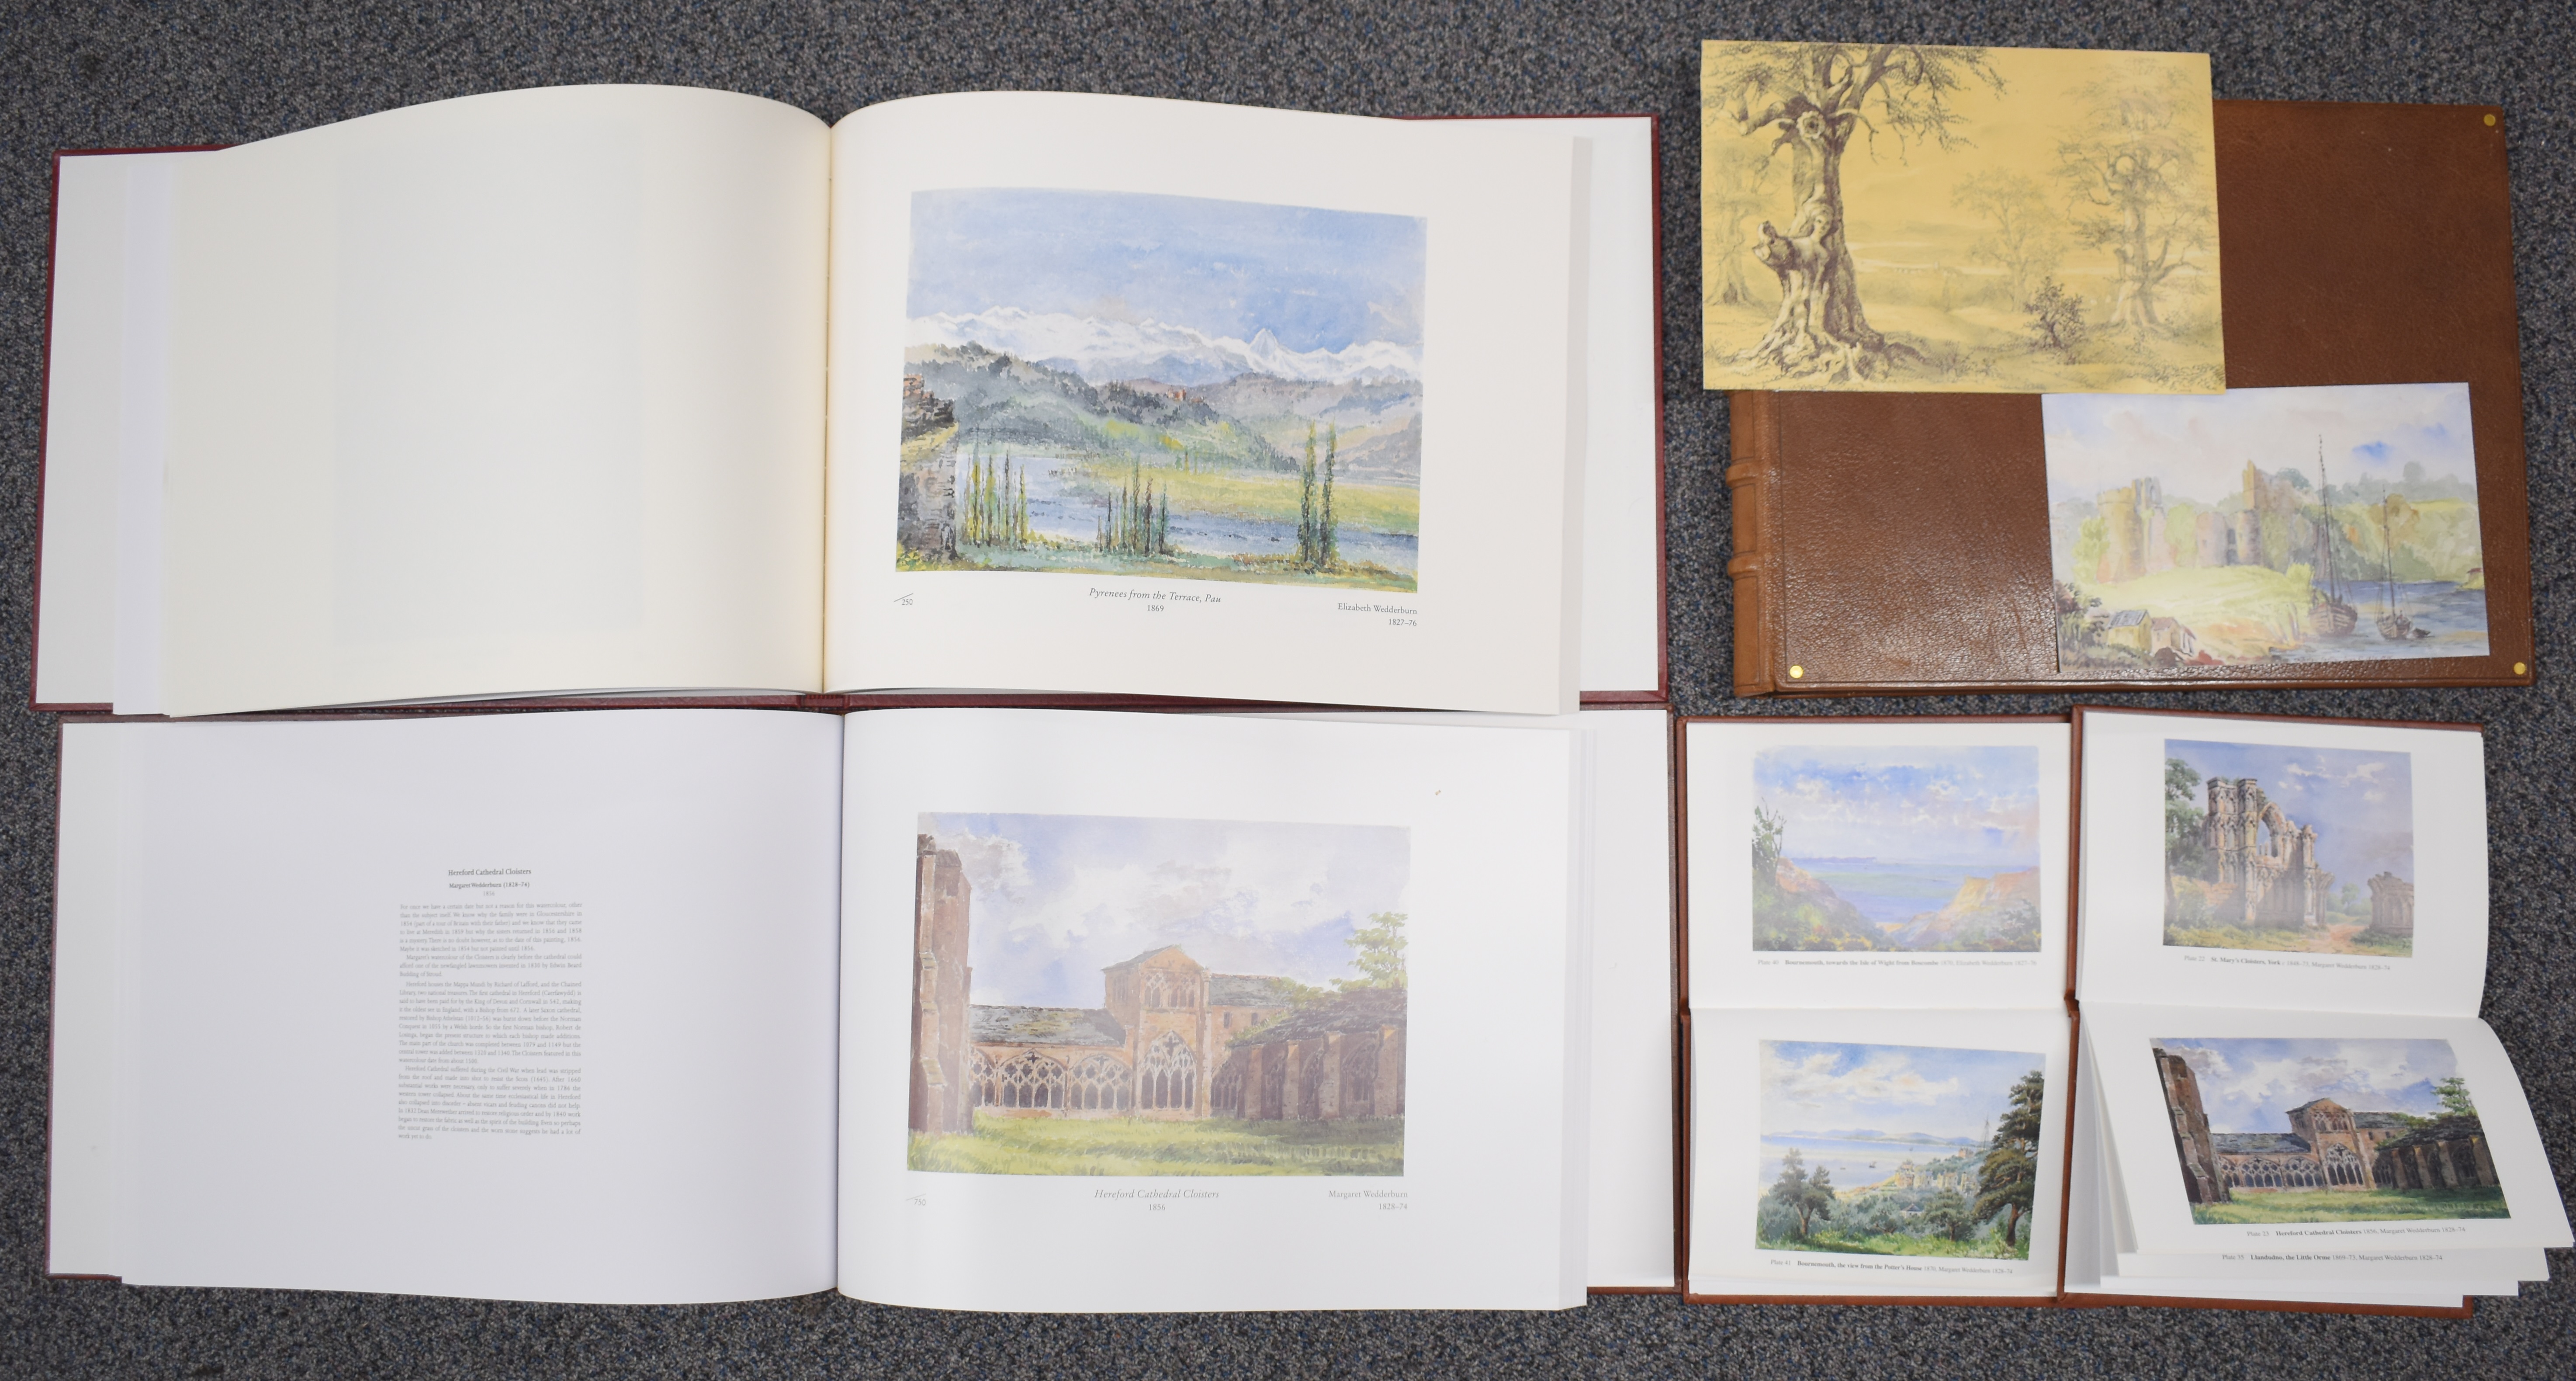 Two Wedderburn Art Collection volumes 1 and 2 (British and Continental) books with with two